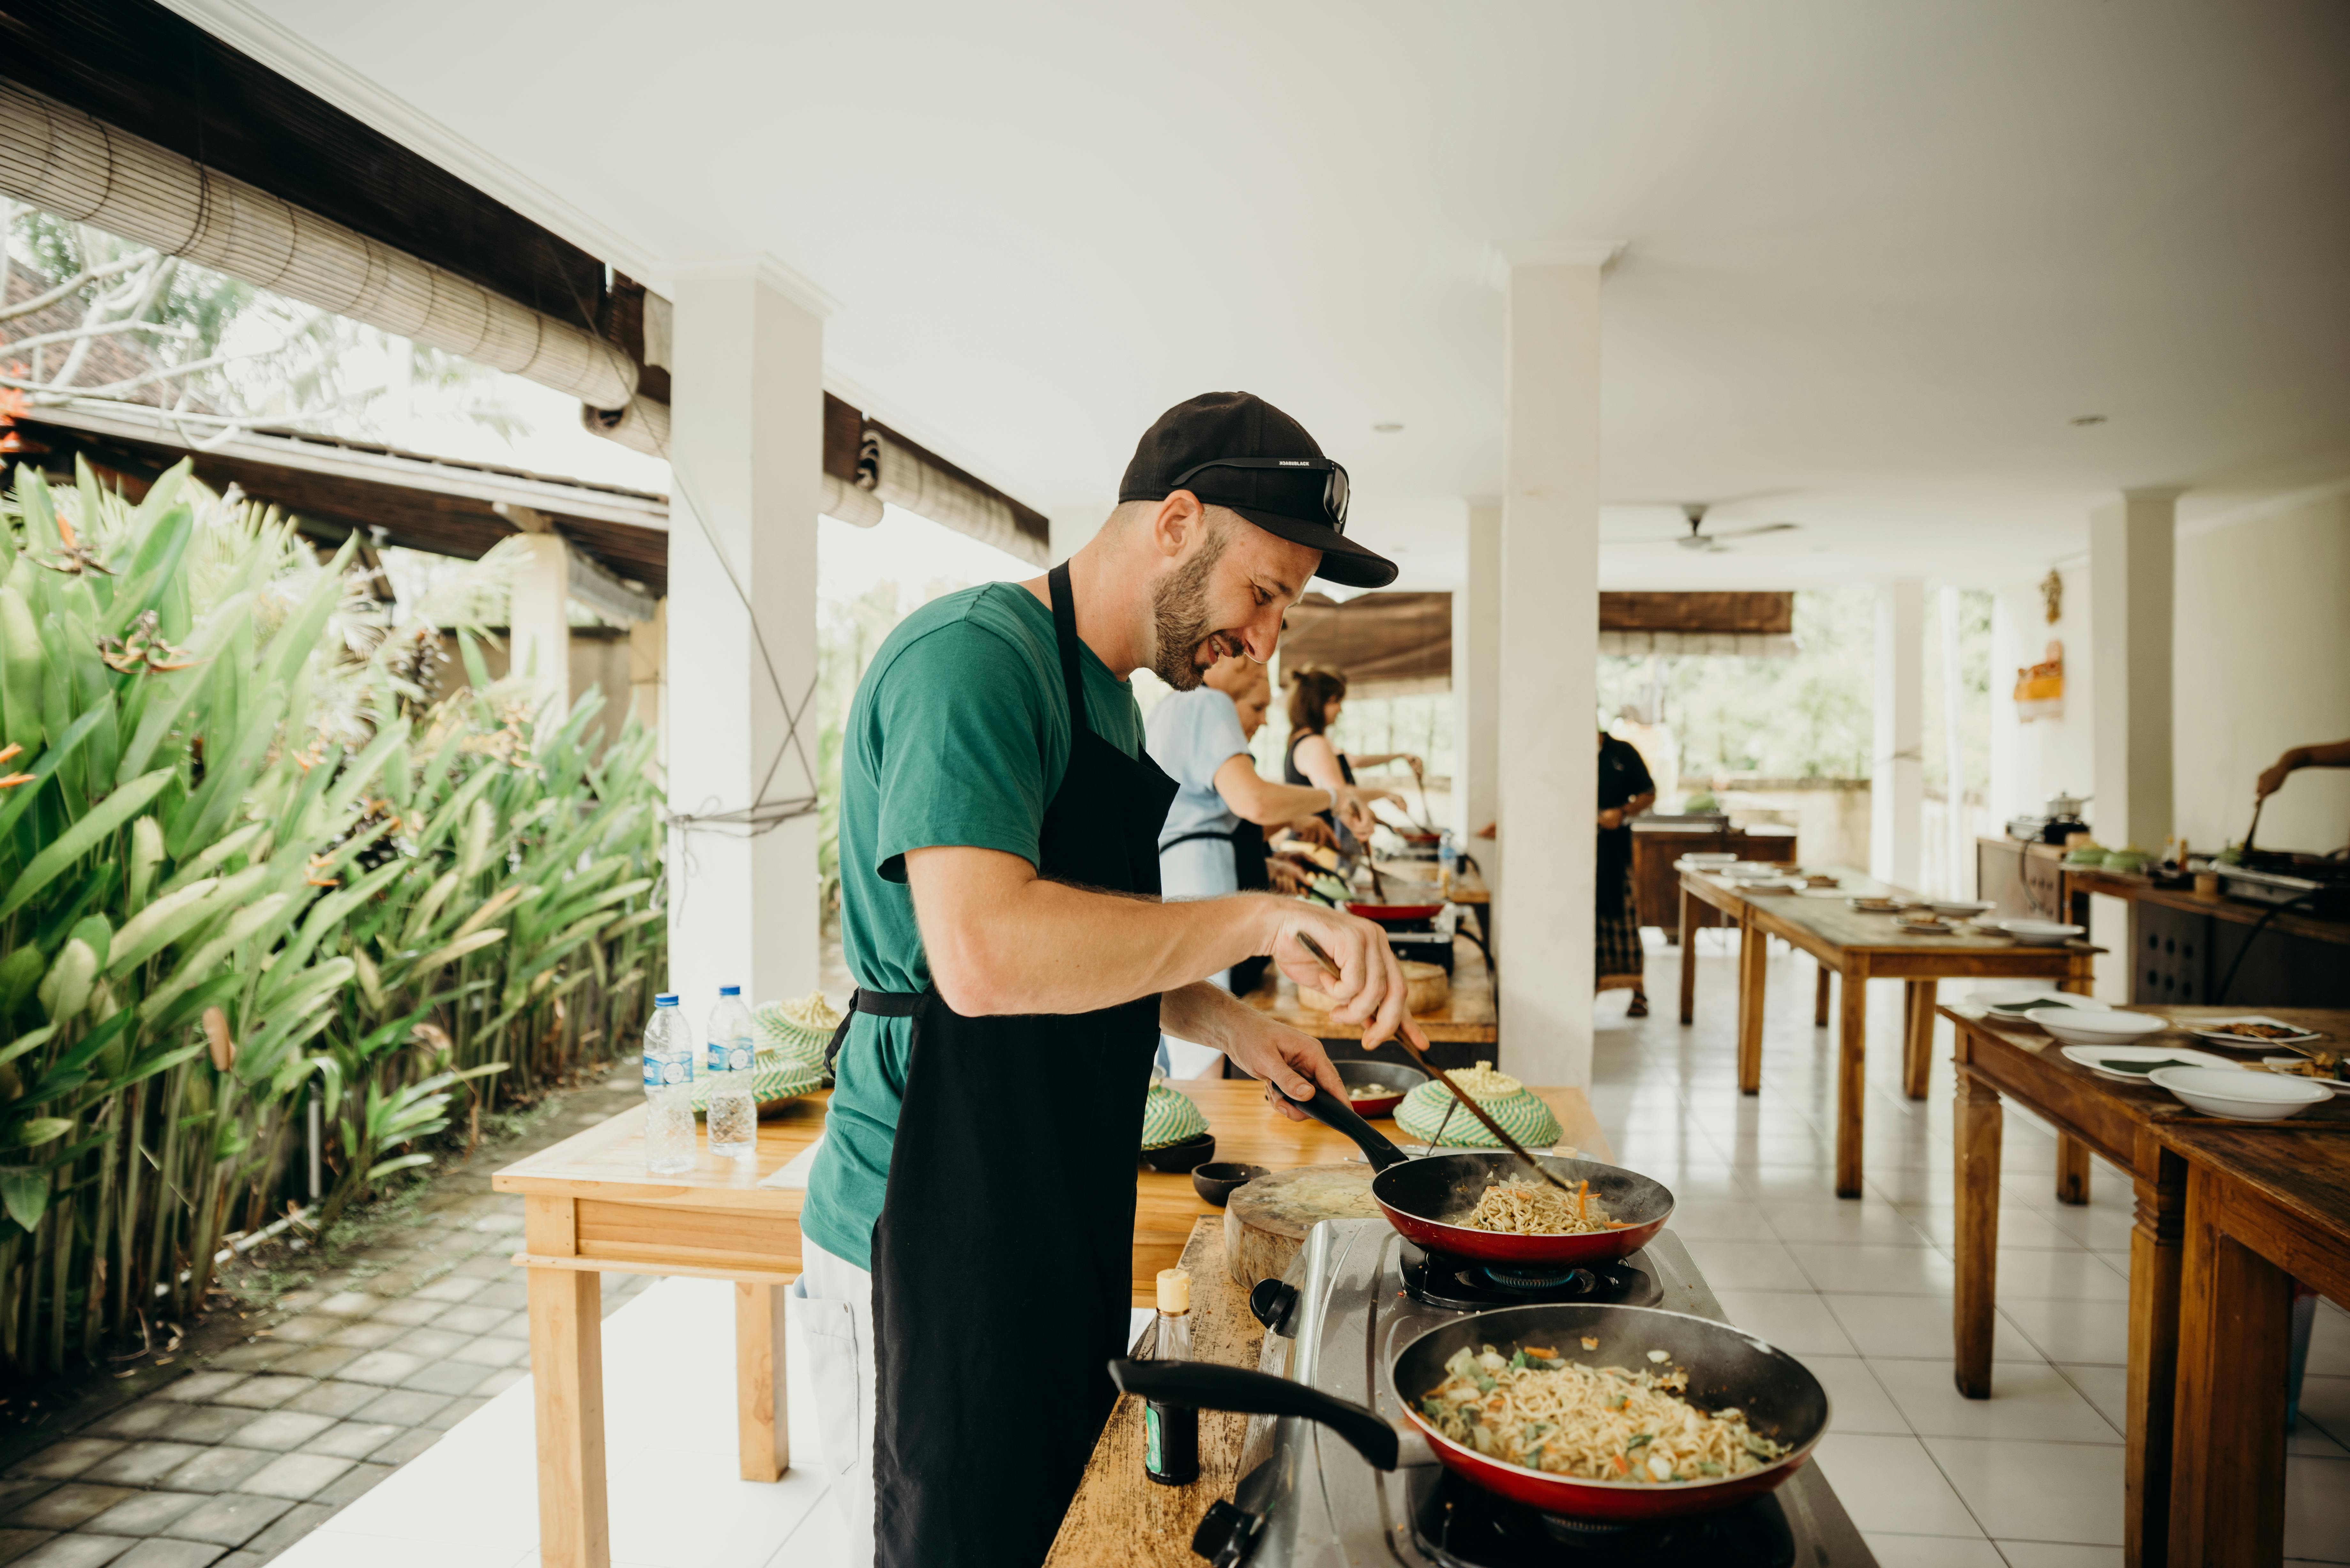 A Man Wearing Black Apron Cooking Food in a Cooking Competition | Source: Pexels